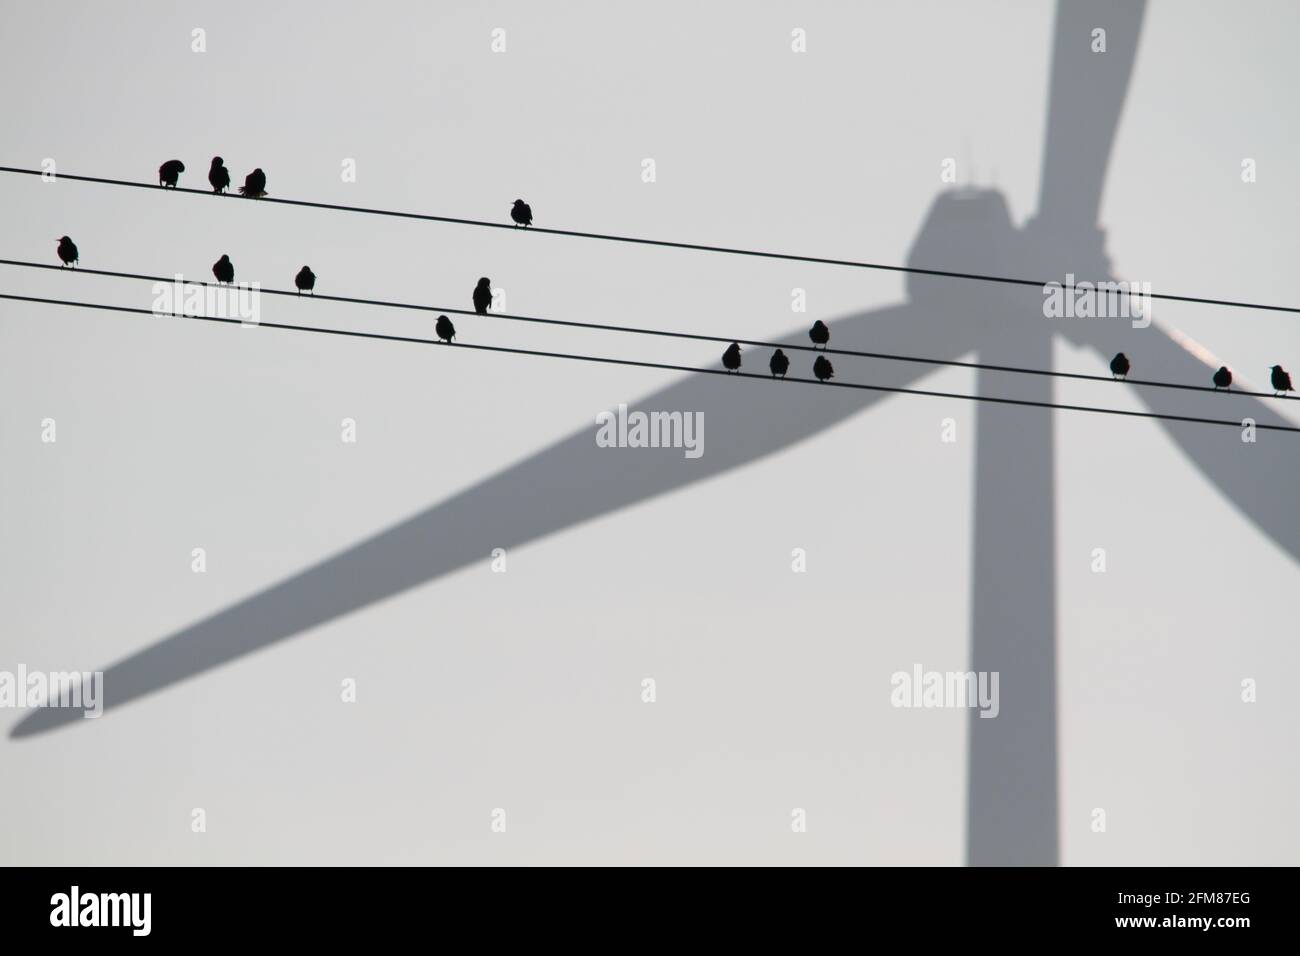 silhouette of a flock of birds with a wind turbine in the background symbolizing conflict with the avifauna Stock Photo